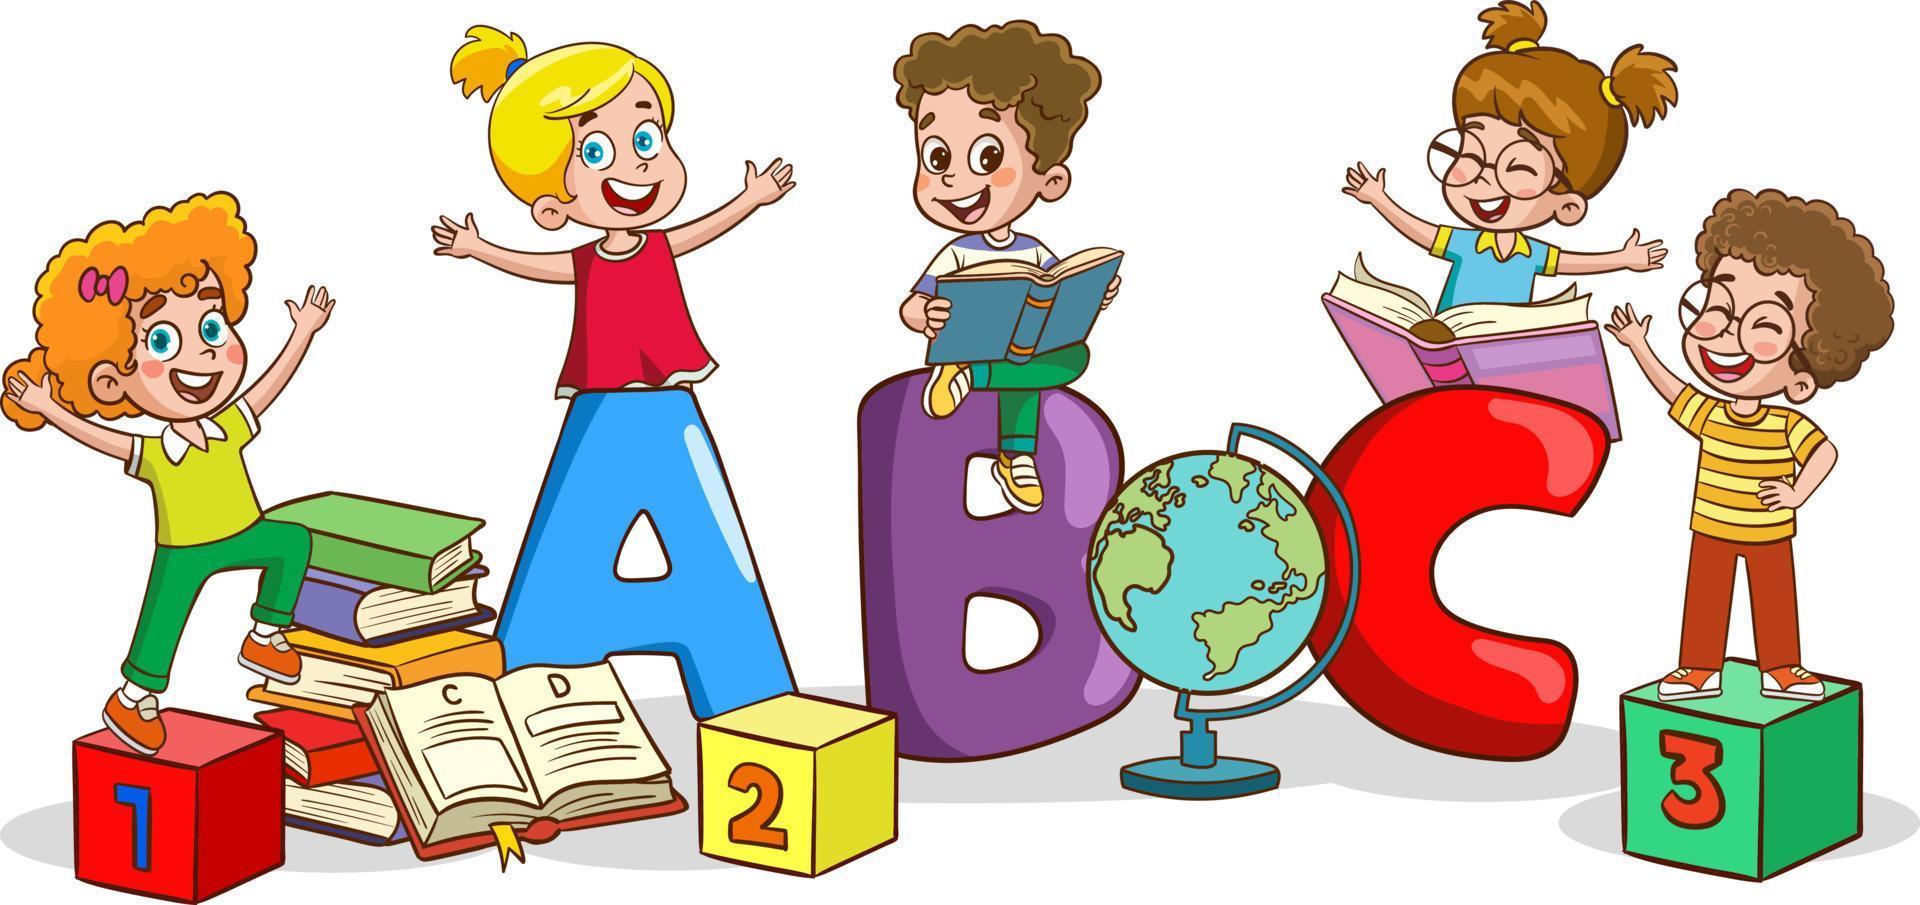 Vector Illustration Of Kids And Alphabet Characters